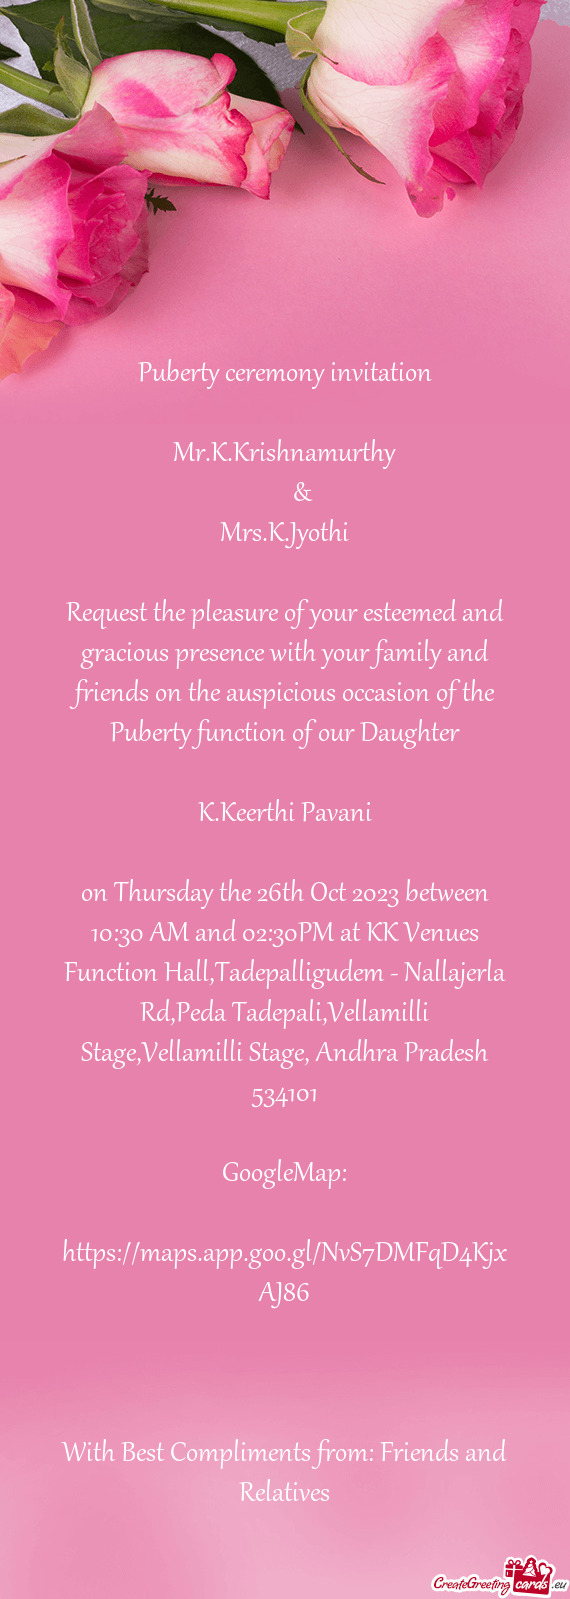 On Thursday the 26th Oct 2023 between 10:30 AM and 02:30PM at KK Venues Function Hall,Tadepalligudem